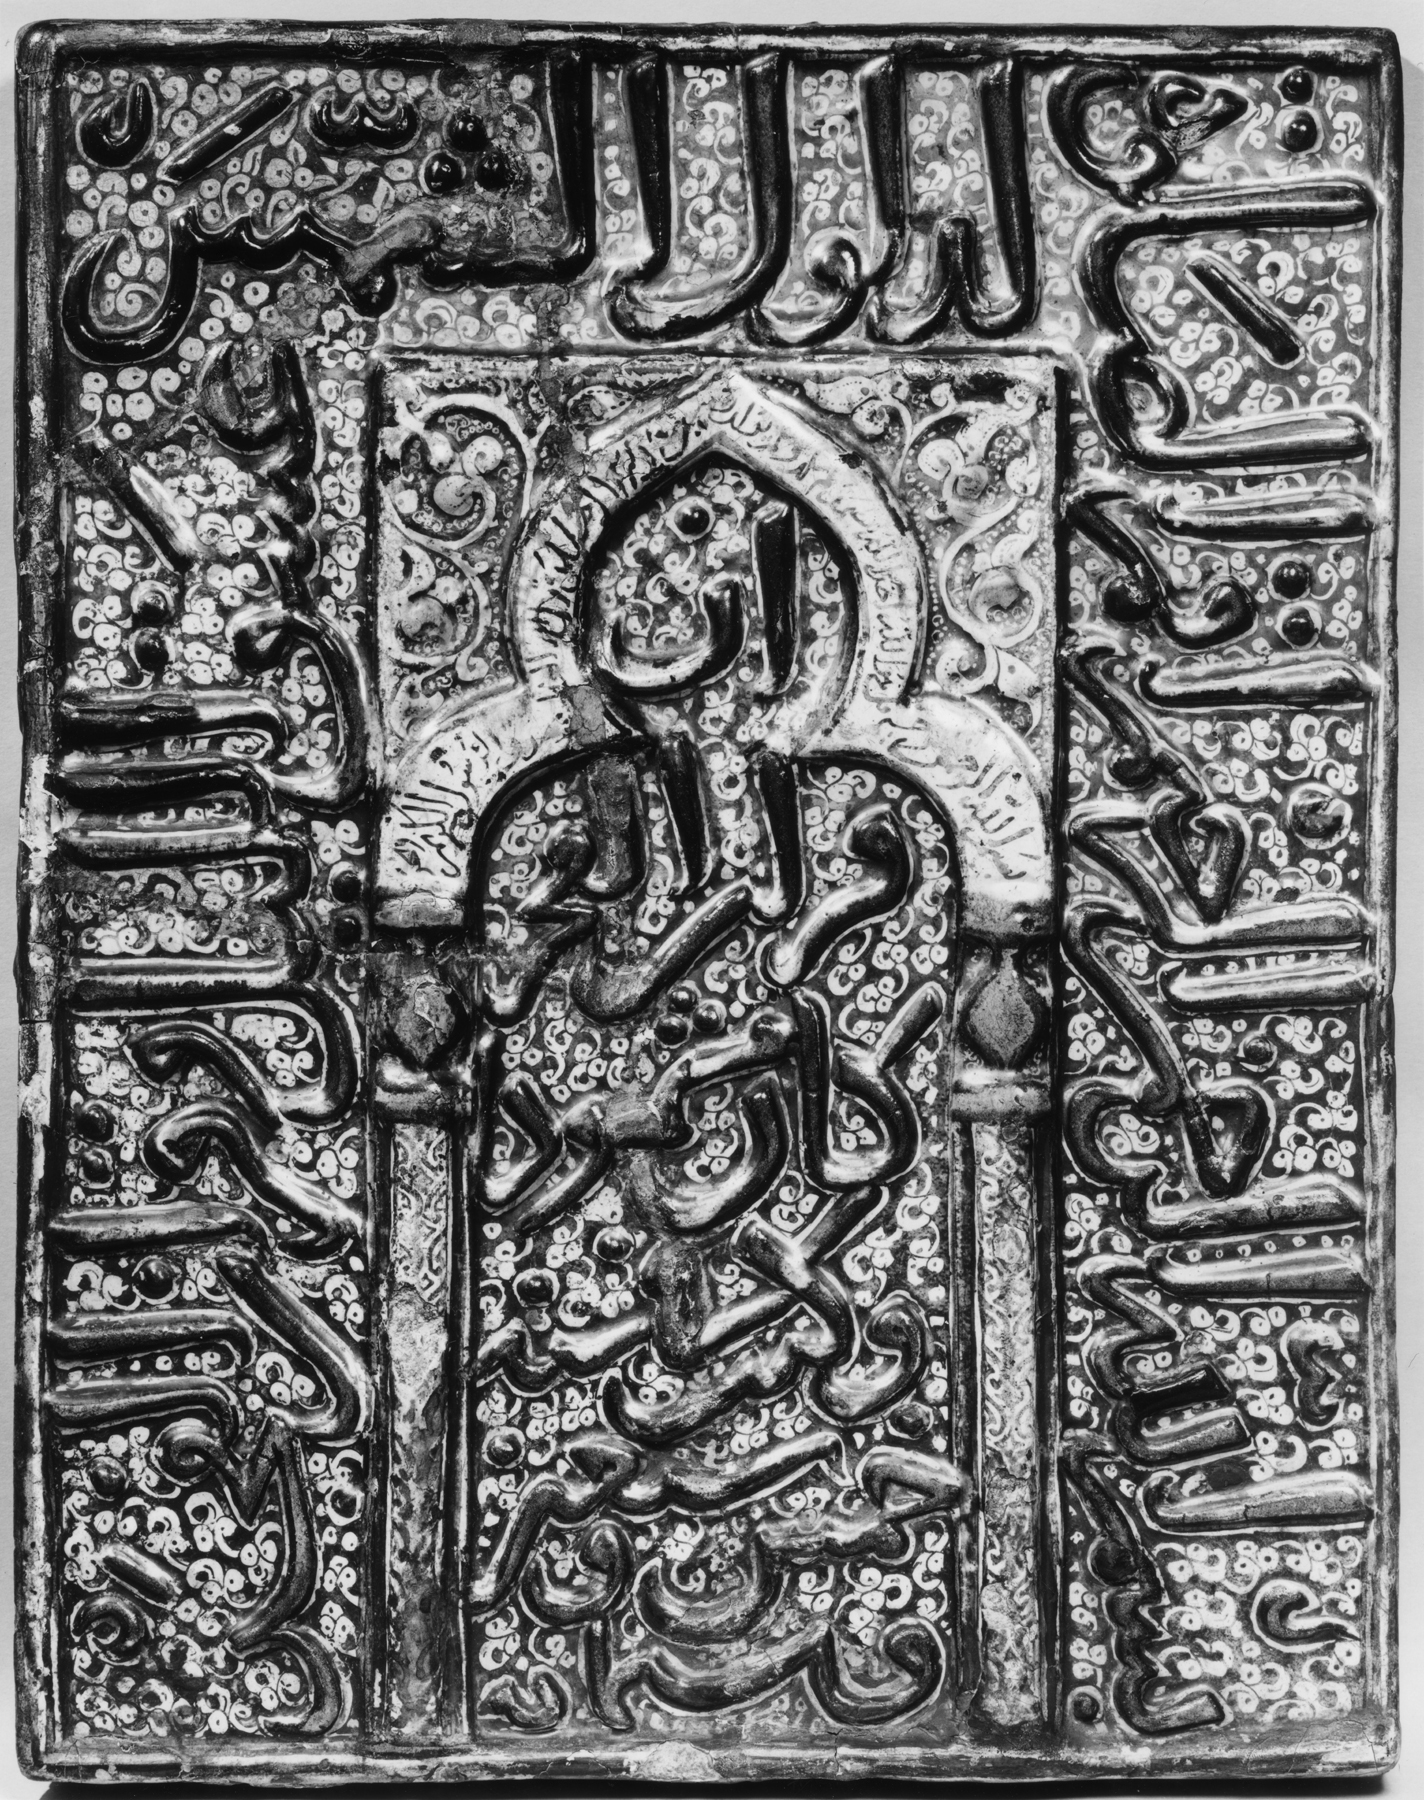 Image for "Mihrab" Plaque